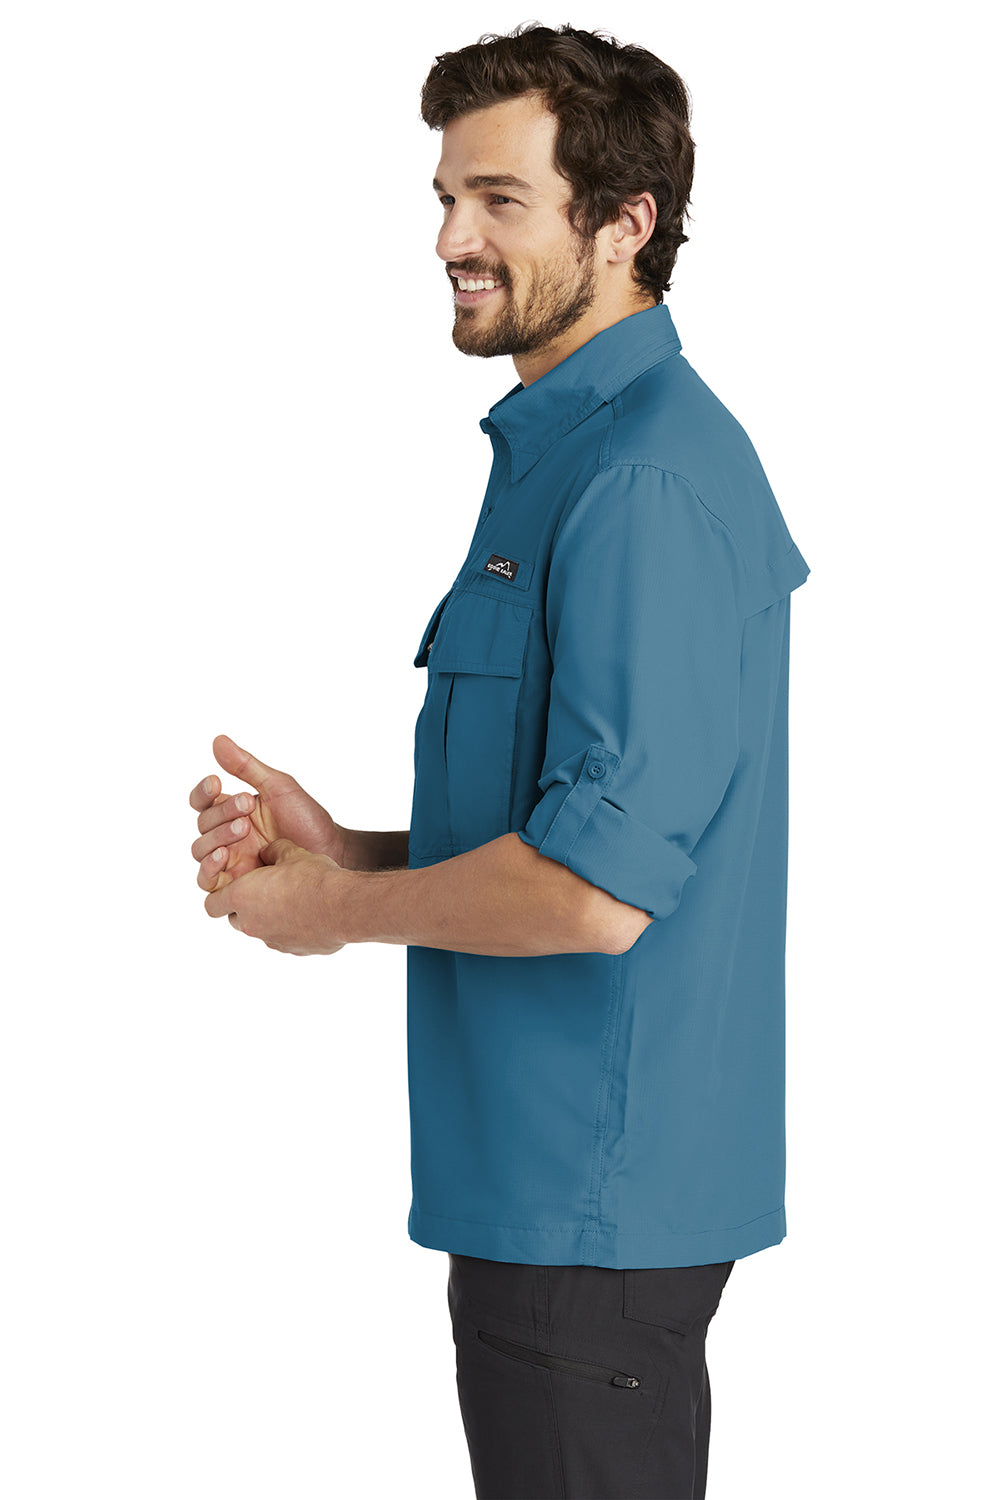 Eddie Bauer EB600 Mens Performance Fishing Moisture Wicking Long Sleeve Button Down Shirt w/ Double Pockets Gulf Teal Blue Model Side